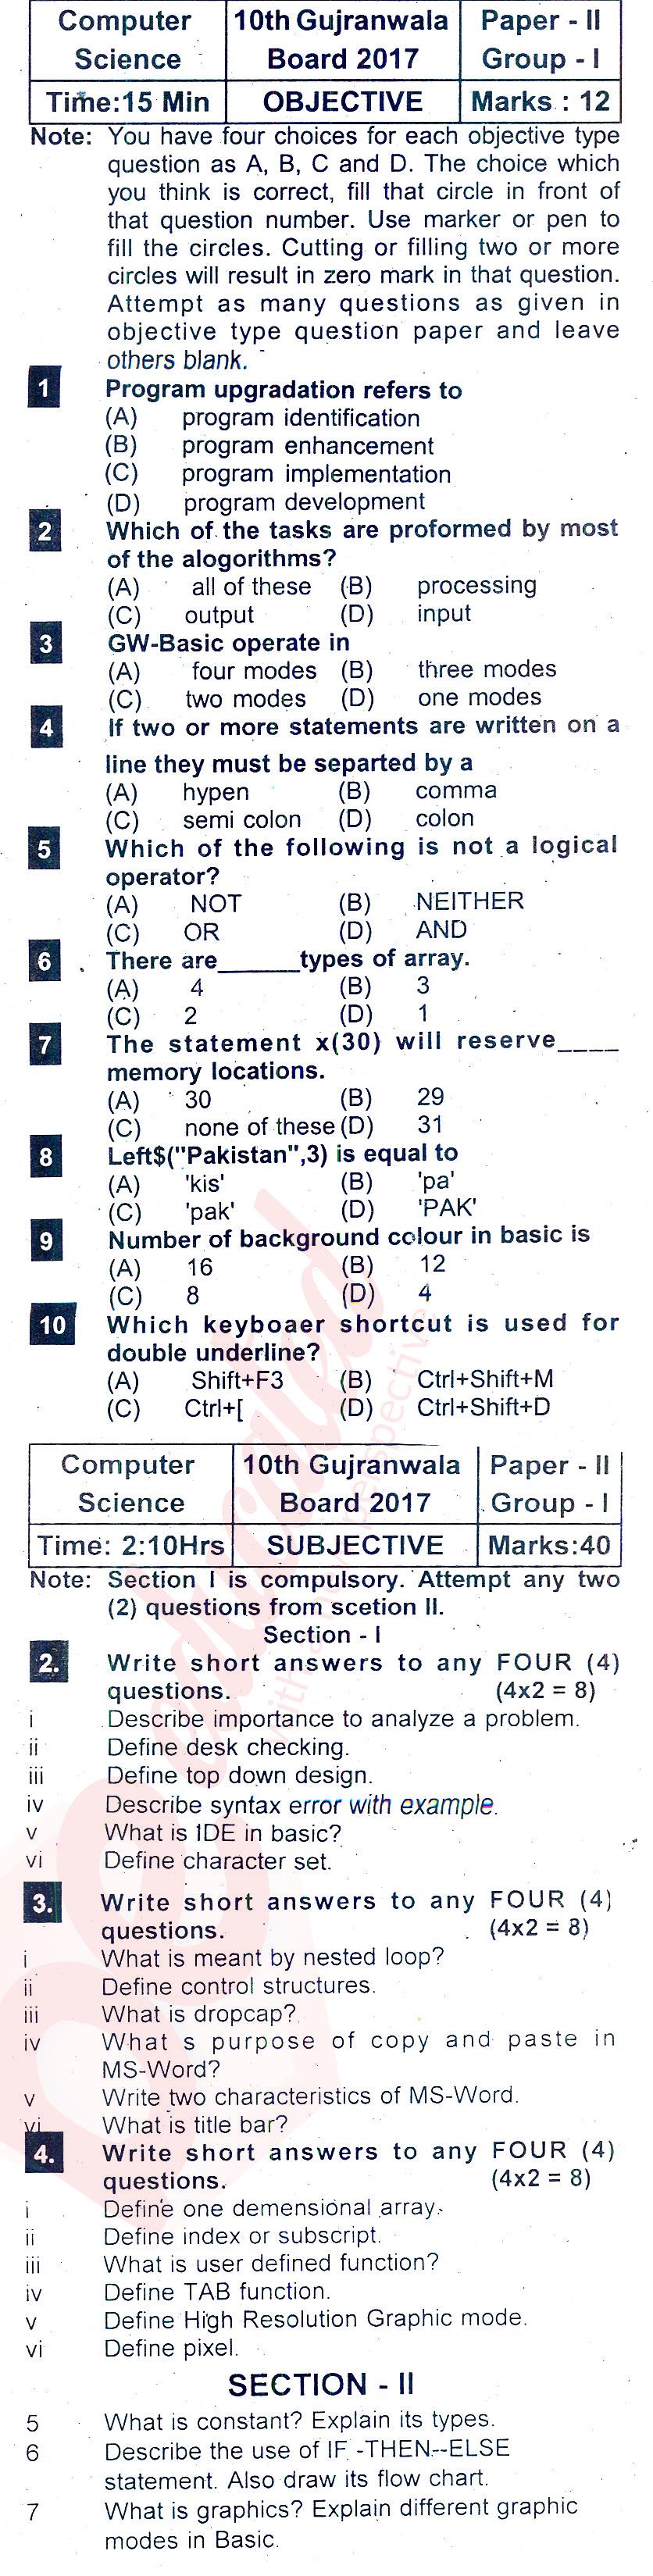 Computer Science 10th class Past Paper Group 1 BISE Gujranwala 2017